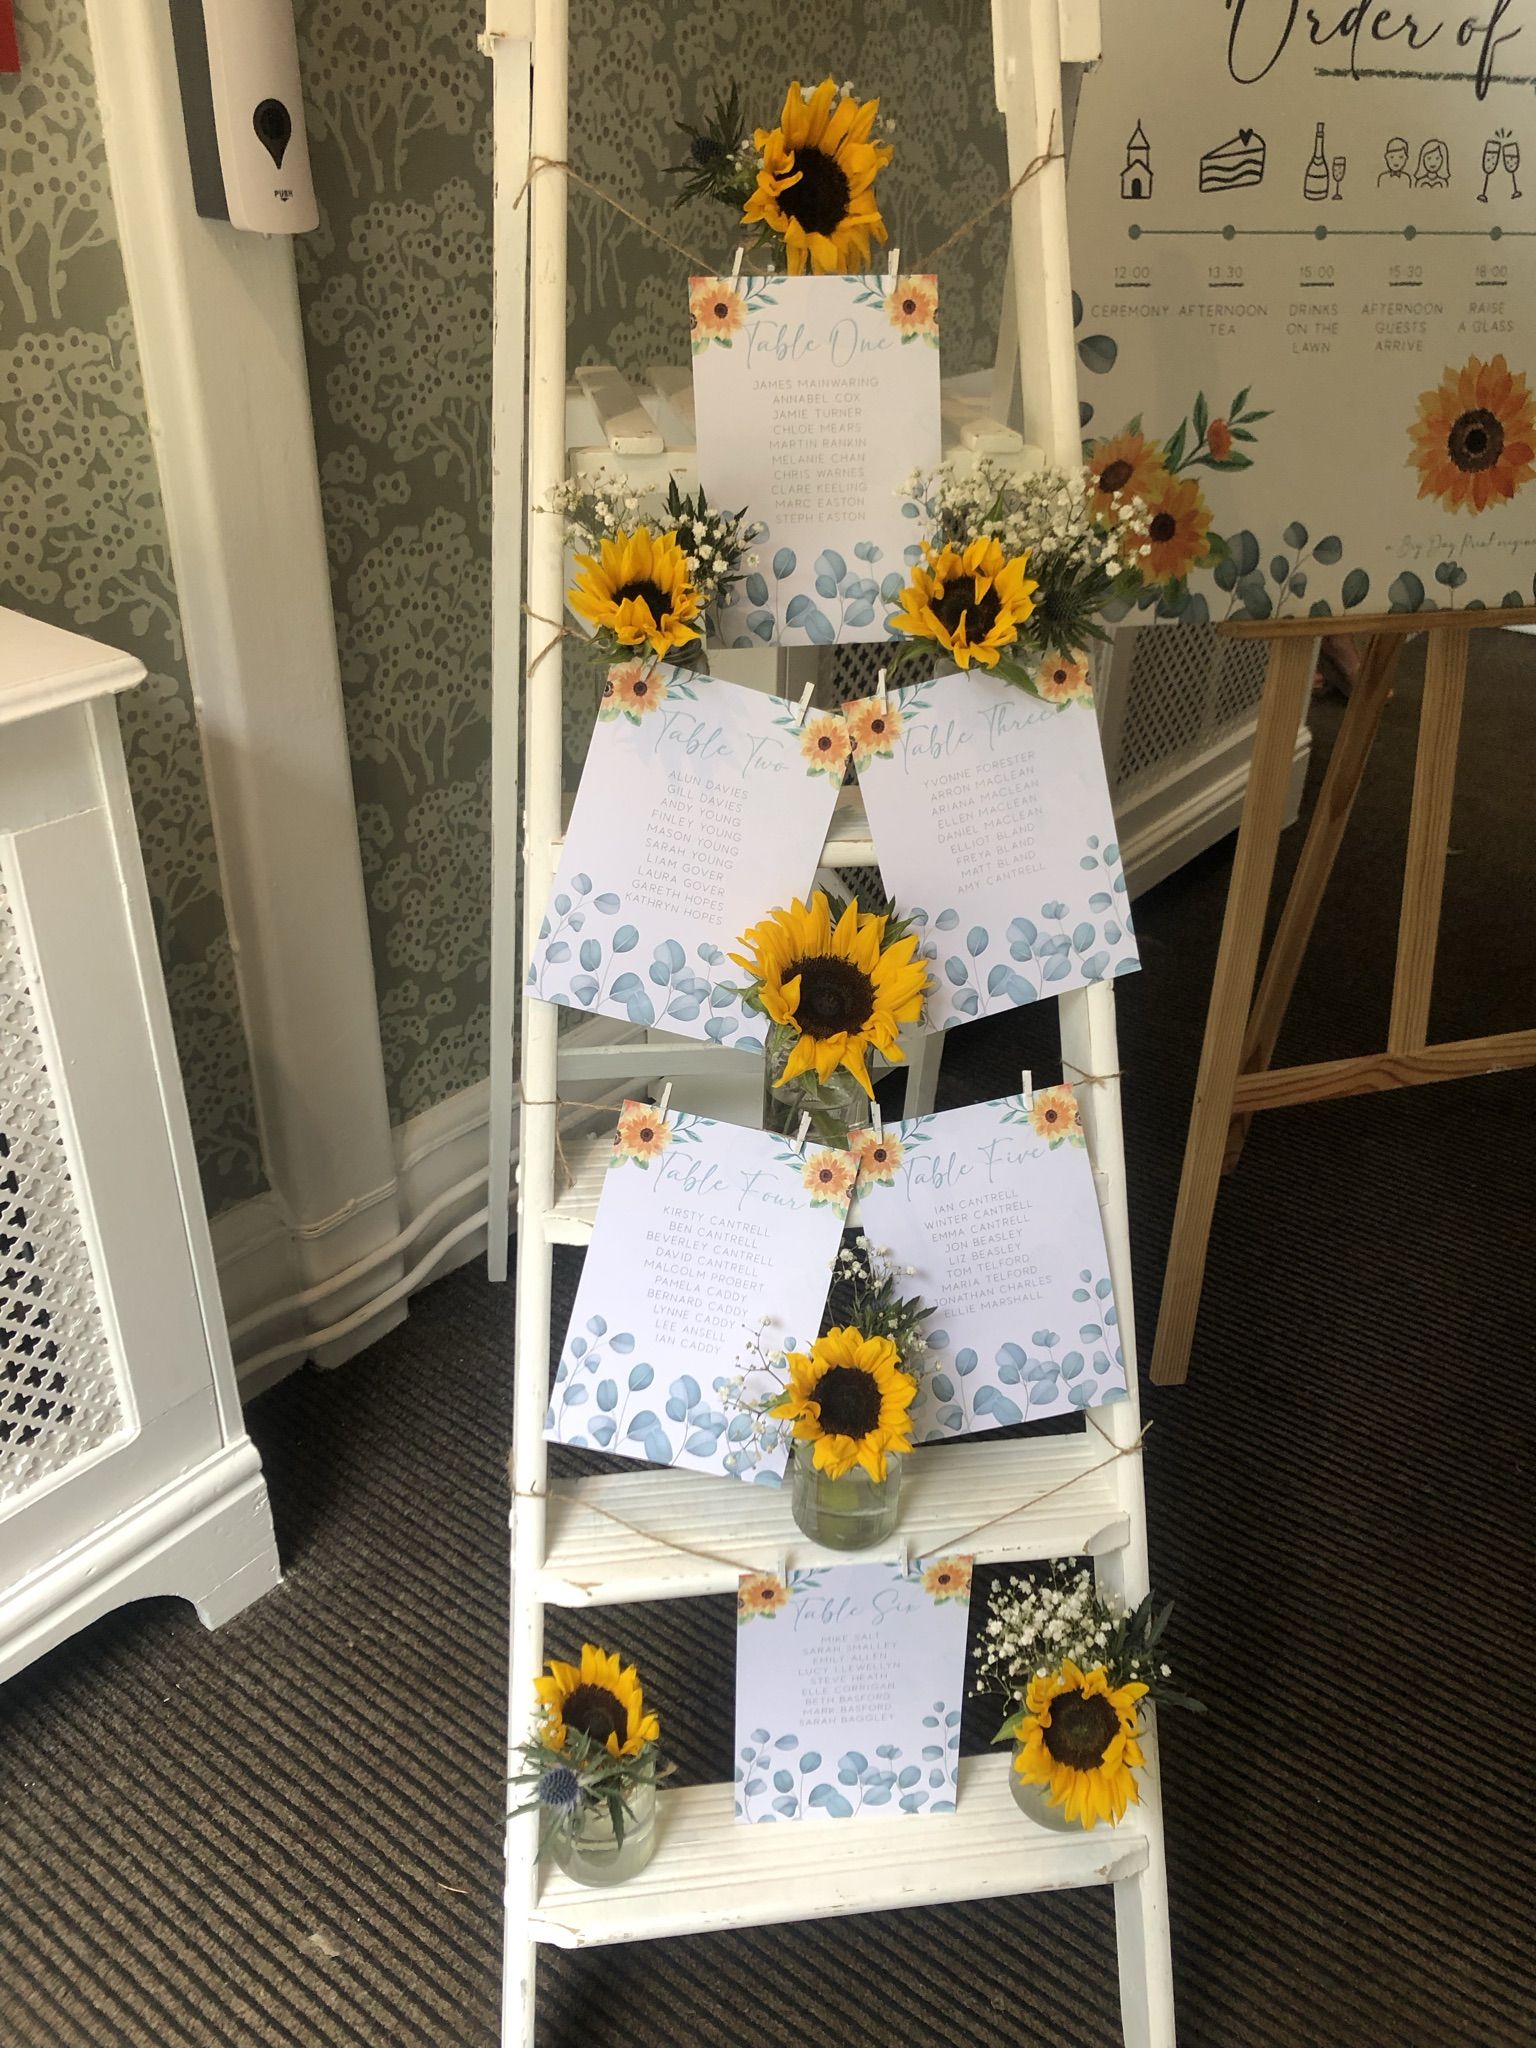 a ladder decorated with sunflowers and notes.